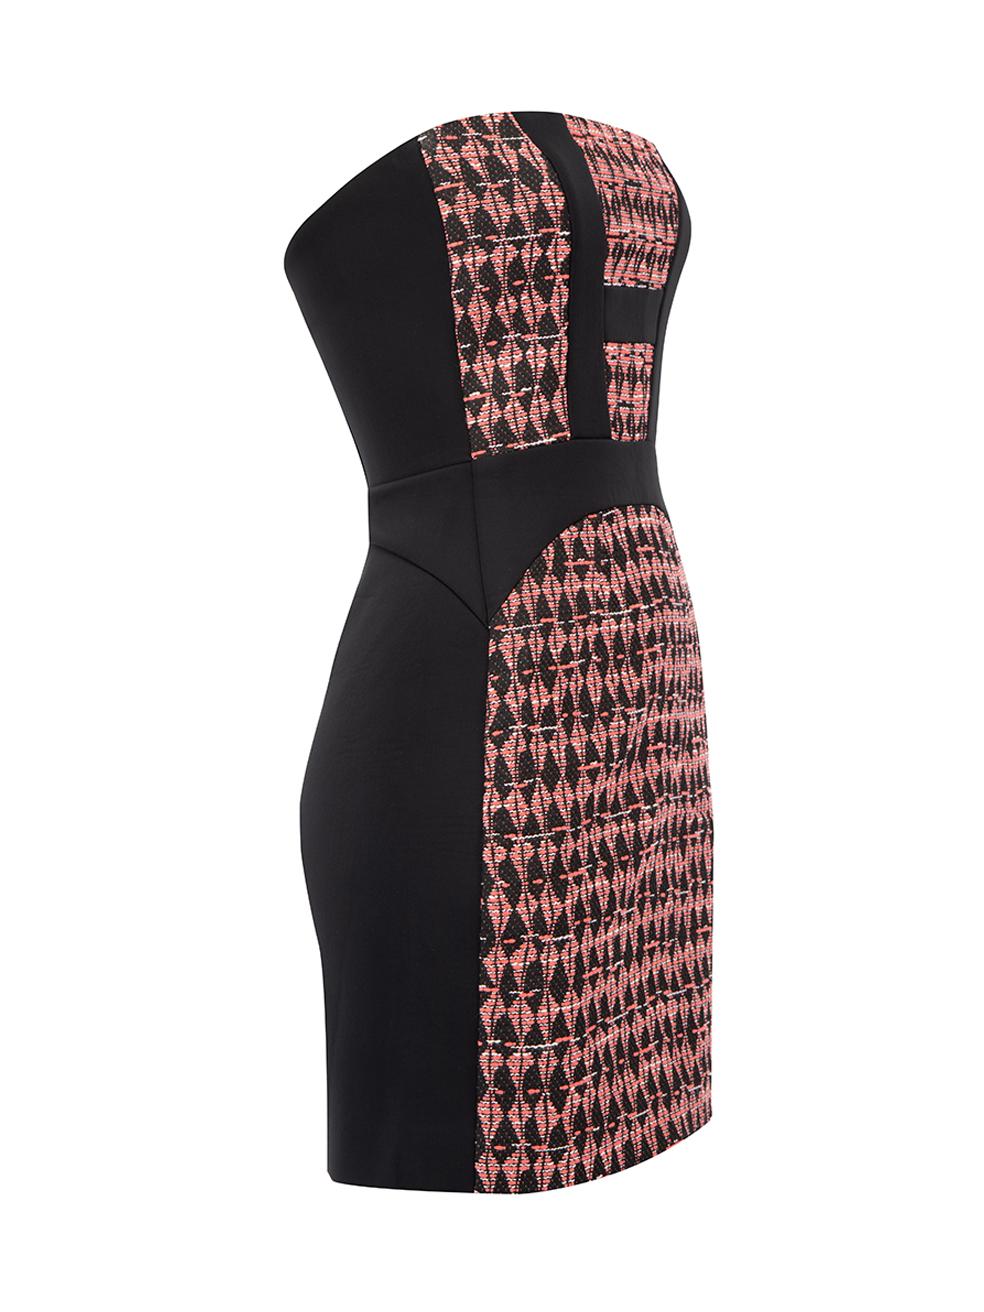 CONDITION is Very good. Minimal wear to dress is evident. Minimal wear and pilling seen to outer fabric on this used maje designer resale item.   Details  Black and pink Synthetic Mini dress Strapless Abstract pattern Back zip closure Back vent  